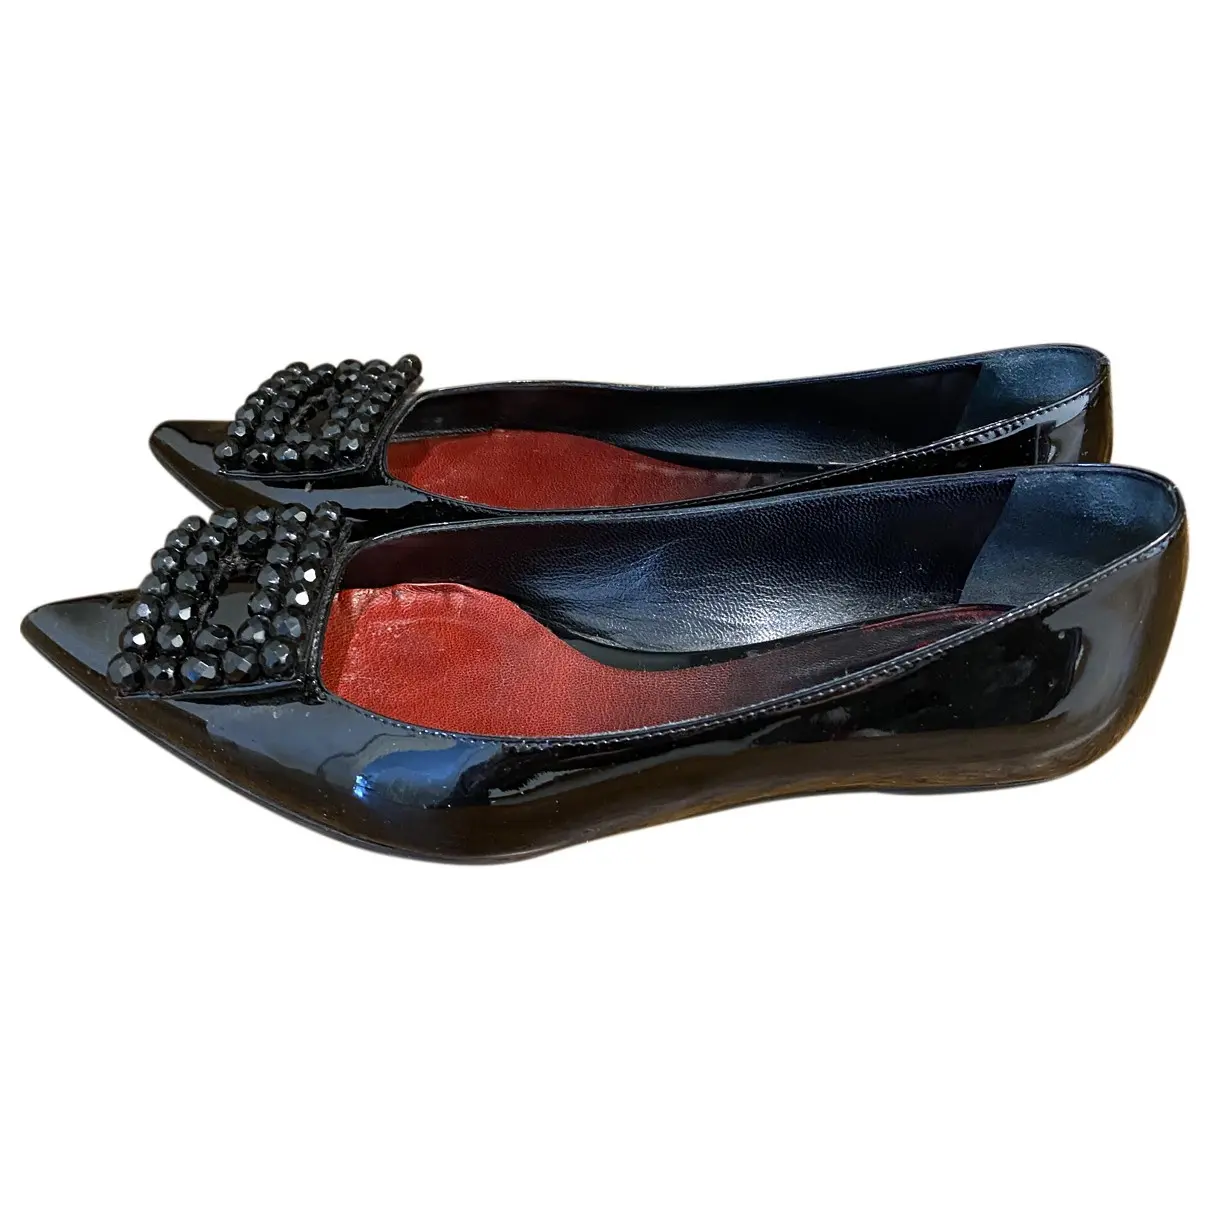 Patent leather ballet flats